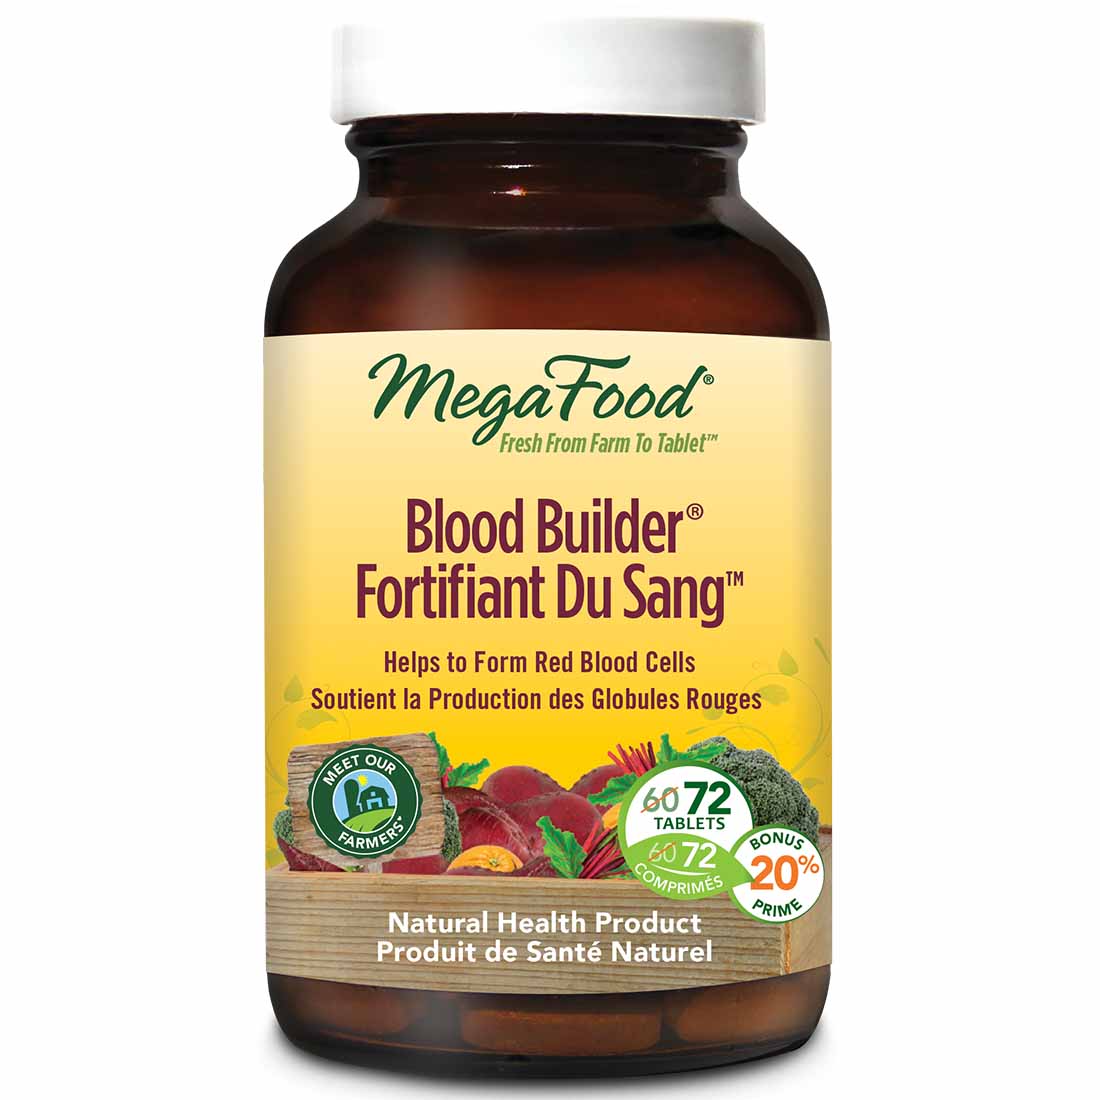 MegaFood Blood Builder, Whole Food Iron Supplement, Helps Form Red Blood Cells